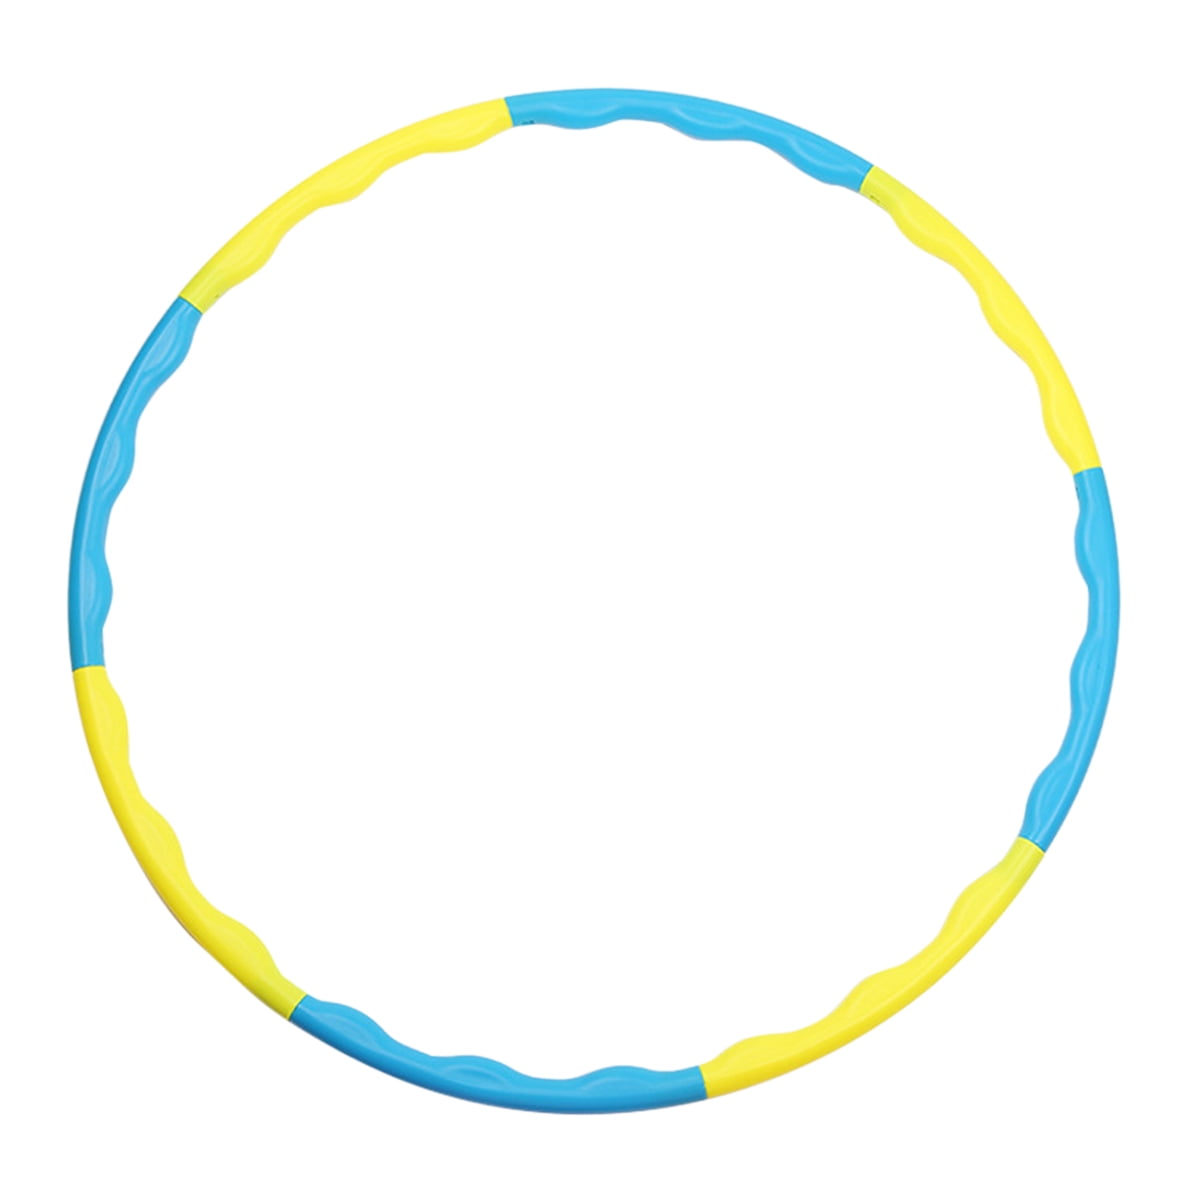 Single Color 4 Section Collapsible Hula Hoop – The Spinsterz